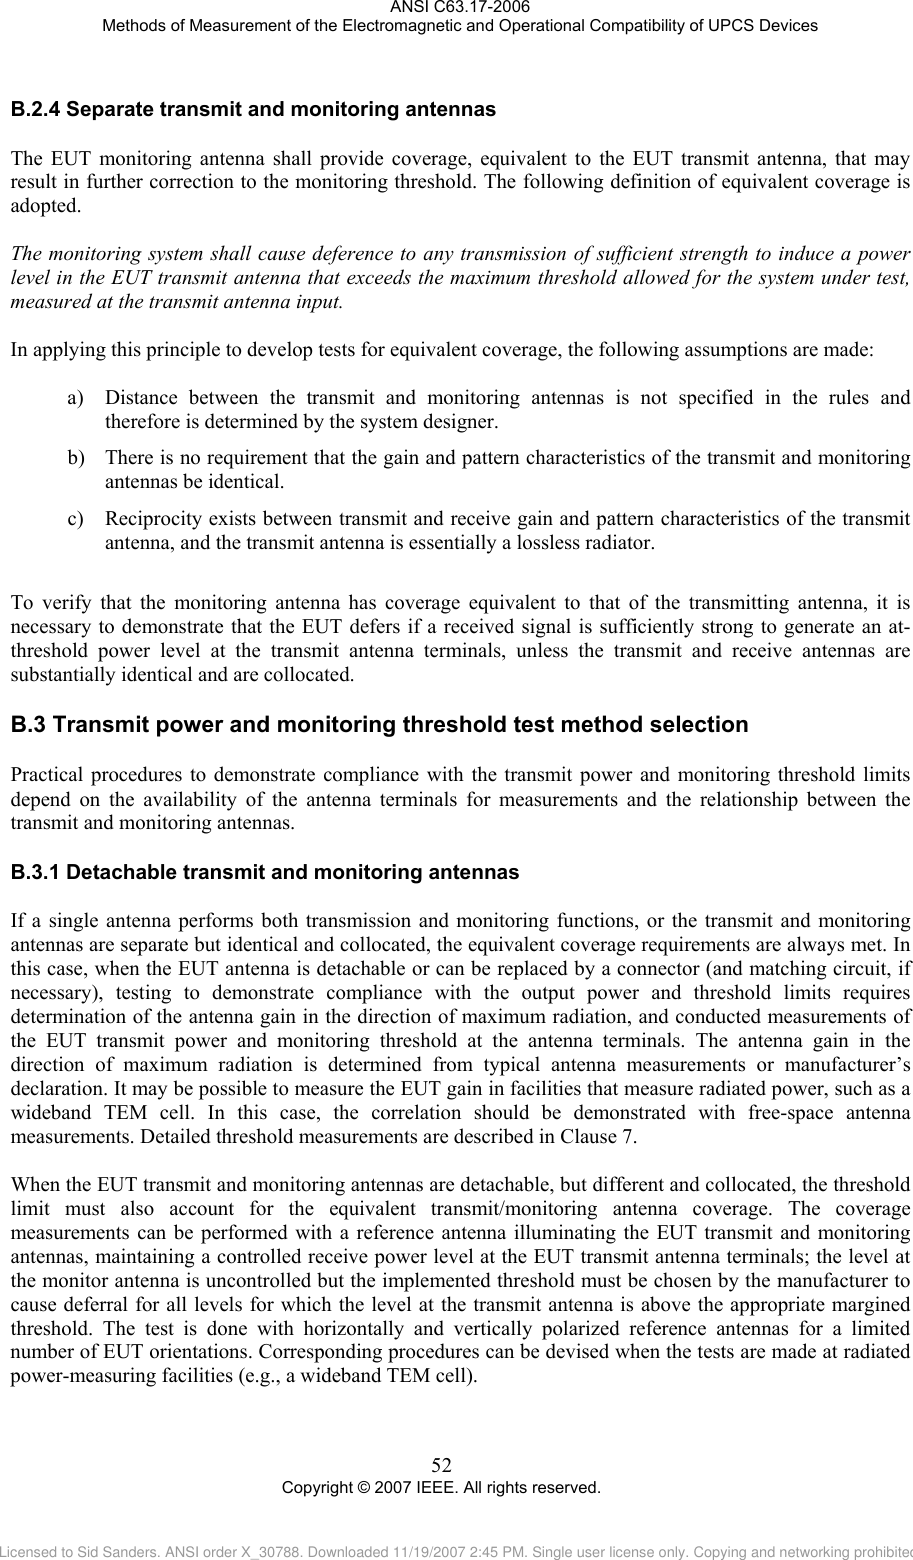 ANSI C63.17-2006 Methods of Measurement of the Electromagnetic and Operational Compatibility of UPCS Devices B.2.4B.3B.3.1 Separate transmit and monitoring antennas The EUT monitoring antenna shall provide coverage, equivalent to the EUT transmit antenna, that may result in further correction to the monitoring threshold. The following definition of equivalent coverage is adopted.  The monitoring system shall cause deference to any transmission of sufficient strength to induce a power level in the EUT transmit antenna that exceeds the maximum threshold allowed for the system under test, measured at the transmit antenna input.  In applying this principle to develop tests for equivalent coverage, the following assumptions are made:  a) Distance between the transmit and monitoring antennas is not specified in the rules and therefore is determined by the system designer. b) There is no requirement that the gain and pattern characteristics of the transmit and monitoring antennas be identical. c) Reciprocity exists between transmit and receive gain and pattern characteristics of the transmit antenna, and the transmit antenna is essentially a lossless radiator.  To verify that the monitoring antenna has coverage equivalent to that of the transmitting antenna, it is necessary to demonstrate that the EUT defers if a received signal is sufficiently strong to generate an at-threshold power level at the transmit antenna terminals, unless the transmit and receive antennas are substantially identical and are collocated.  Transmit power and monitoring threshold test method selection Practical procedures to demonstrate compliance with the transmit power and monitoring threshold limits depend on the availability of the antenna terminals for measurements and the relationship between the transmit and monitoring antennas.   Detachable transmit and monitoring antennas If a single antenna performs both transmission and monitoring functions, or the transmit and monitoring antennas are separate but identical and collocated, the equivalent coverage requirements are always met. In this case, when the EUT antenna is detachable or can be replaced by a connector (and matching circuit, if necessary), testing to demonstrate compliance with the output power and threshold limits requires determination of the antenna gain in the direction of maximum radiation, and conducted measurements of the EUT transmit power and monitoring threshold at the antenna terminals. The antenna gain in the direction of maximum radiation is determined from typical antenna measurements or manufacturer’s declaration. It may be possible to measure the EUT gain in facilities that measure radiated power, such as a wideband TEM cell. In this case, the correlation should be demonstrated with free-space antenna measurements. Detailed threshold measurements are described in Clause 7.  When the EUT transmit and monitoring antennas are detachable, but different and collocated, the threshold limit must also account for the equivalent transmit/monitoring antenna coverage. The coverage measurements can be performed with a reference antenna illuminating the EUT transmit and monitoring antennas, maintaining a controlled receive power level at the EUT transmit antenna terminals; the level at the monitor antenna is uncontrolled but the implemented threshold must be chosen by the manufacturer to cause deferral for all levels for which the level at the transmit antenna is above the appropriate margined threshold. The test is done with horizontally and vertically polarized reference antennas for a limited number of EUT orientations. Corresponding procedures can be devised when the tests are made at radiated power-measuring facilities (e.g., a wideband TEM cell).  52 Copyright © 2007 IEEE. All rights reserved. Licensed to Sid Sanders. ANSI order X_30788. Downloaded 11/19/2007 2:45 PM. Single user license only. Copying and networking prohibited.